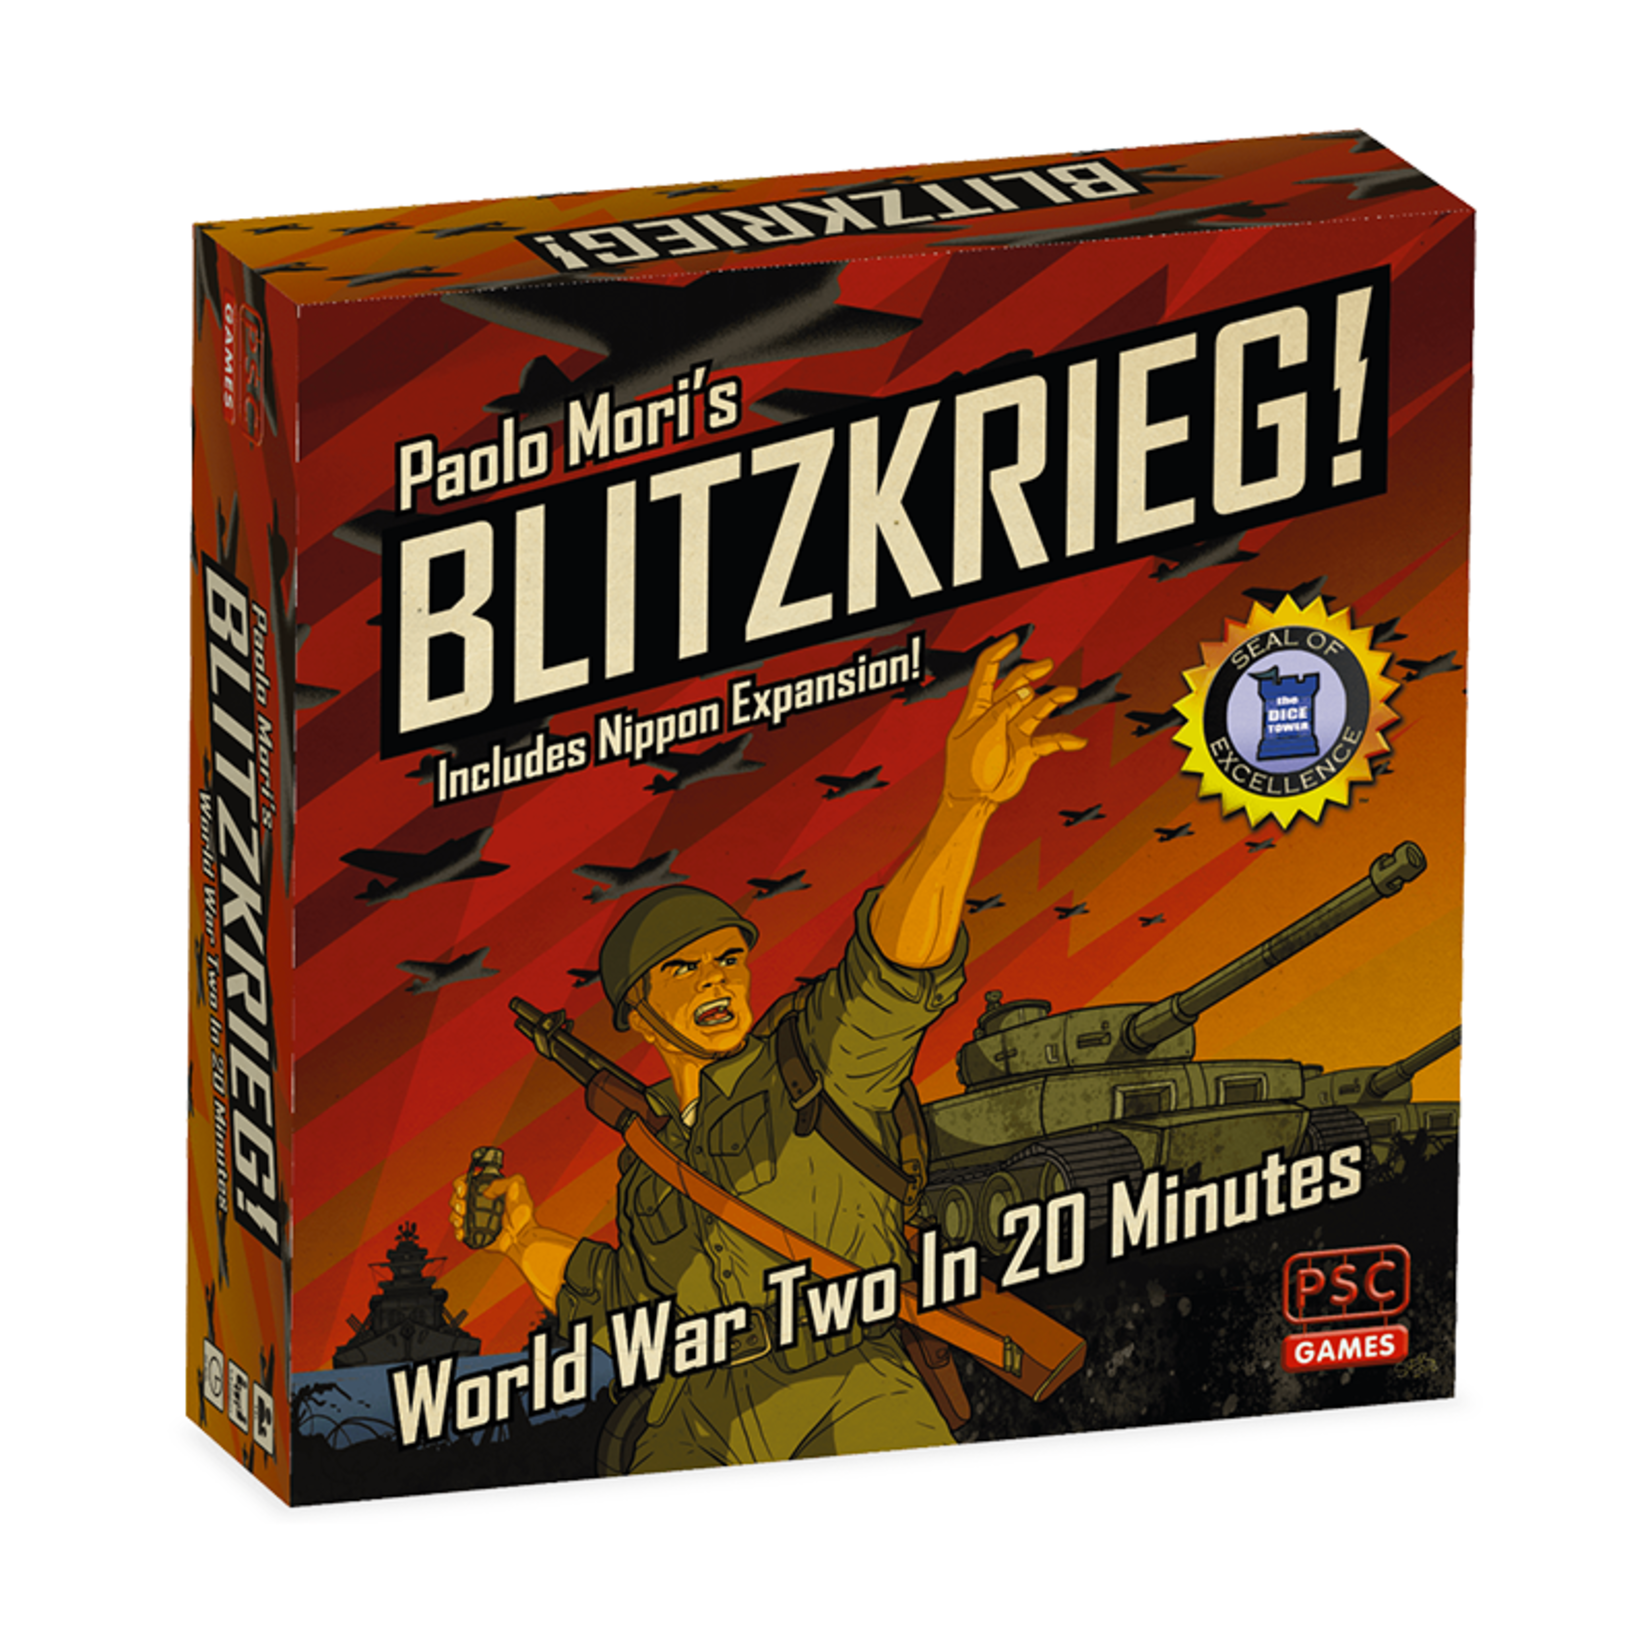 PSC Games Blitzkrieg: Square Edition – World War Two in 20 Minutes!